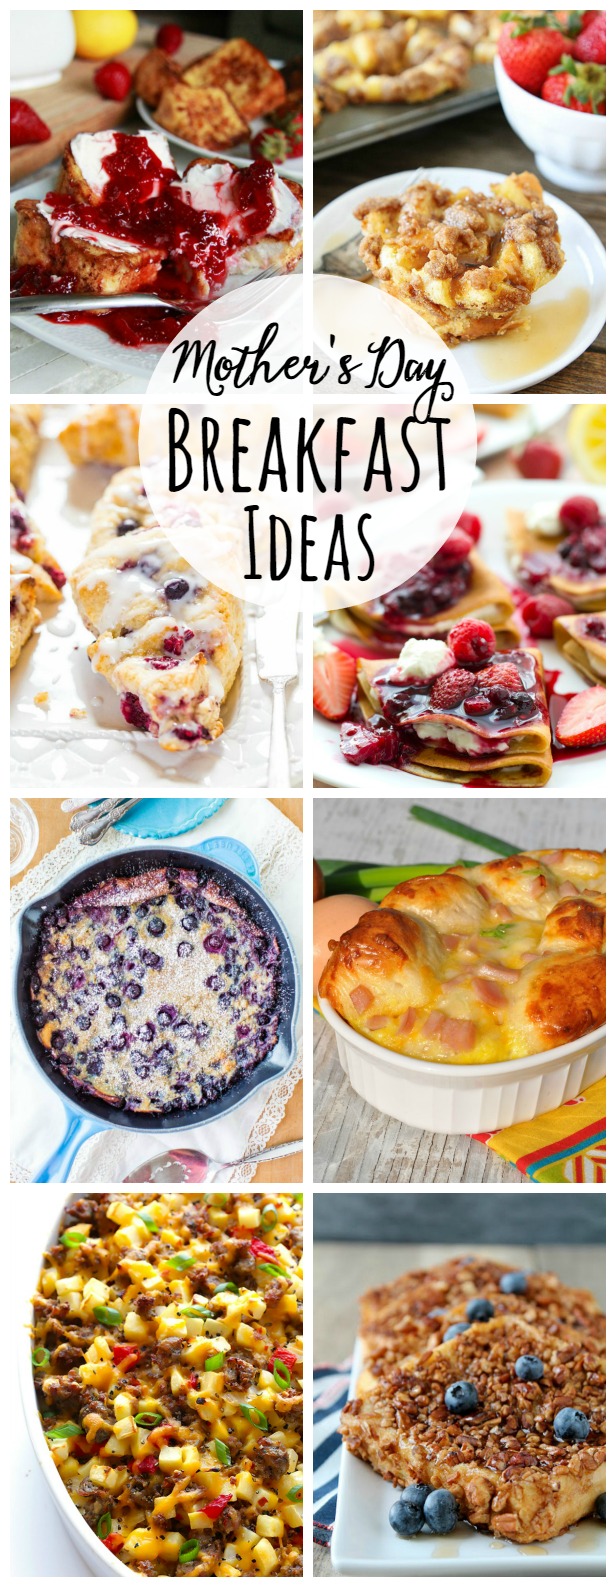 Delicious breakfast ideas perfect for Mother's Day! // cleanandscentsible.com